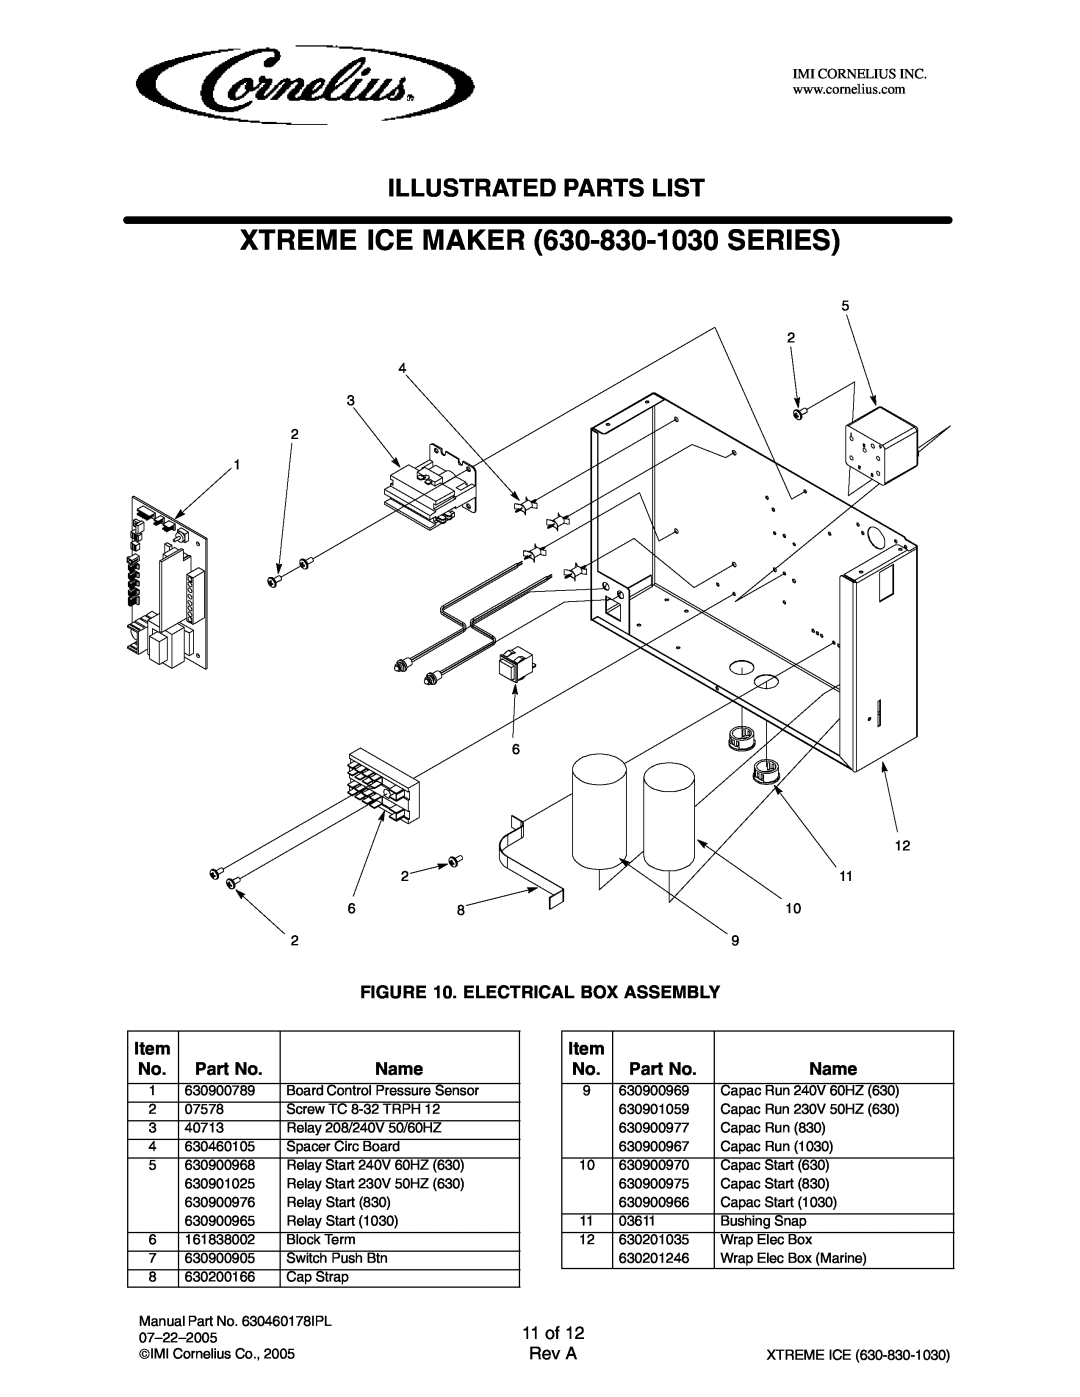 Cornelius 631808001 11 of, XTREME ICE MAKER 630-830-1030SERIES, Illustrated Parts List, Electrical Box Assembly, Item 